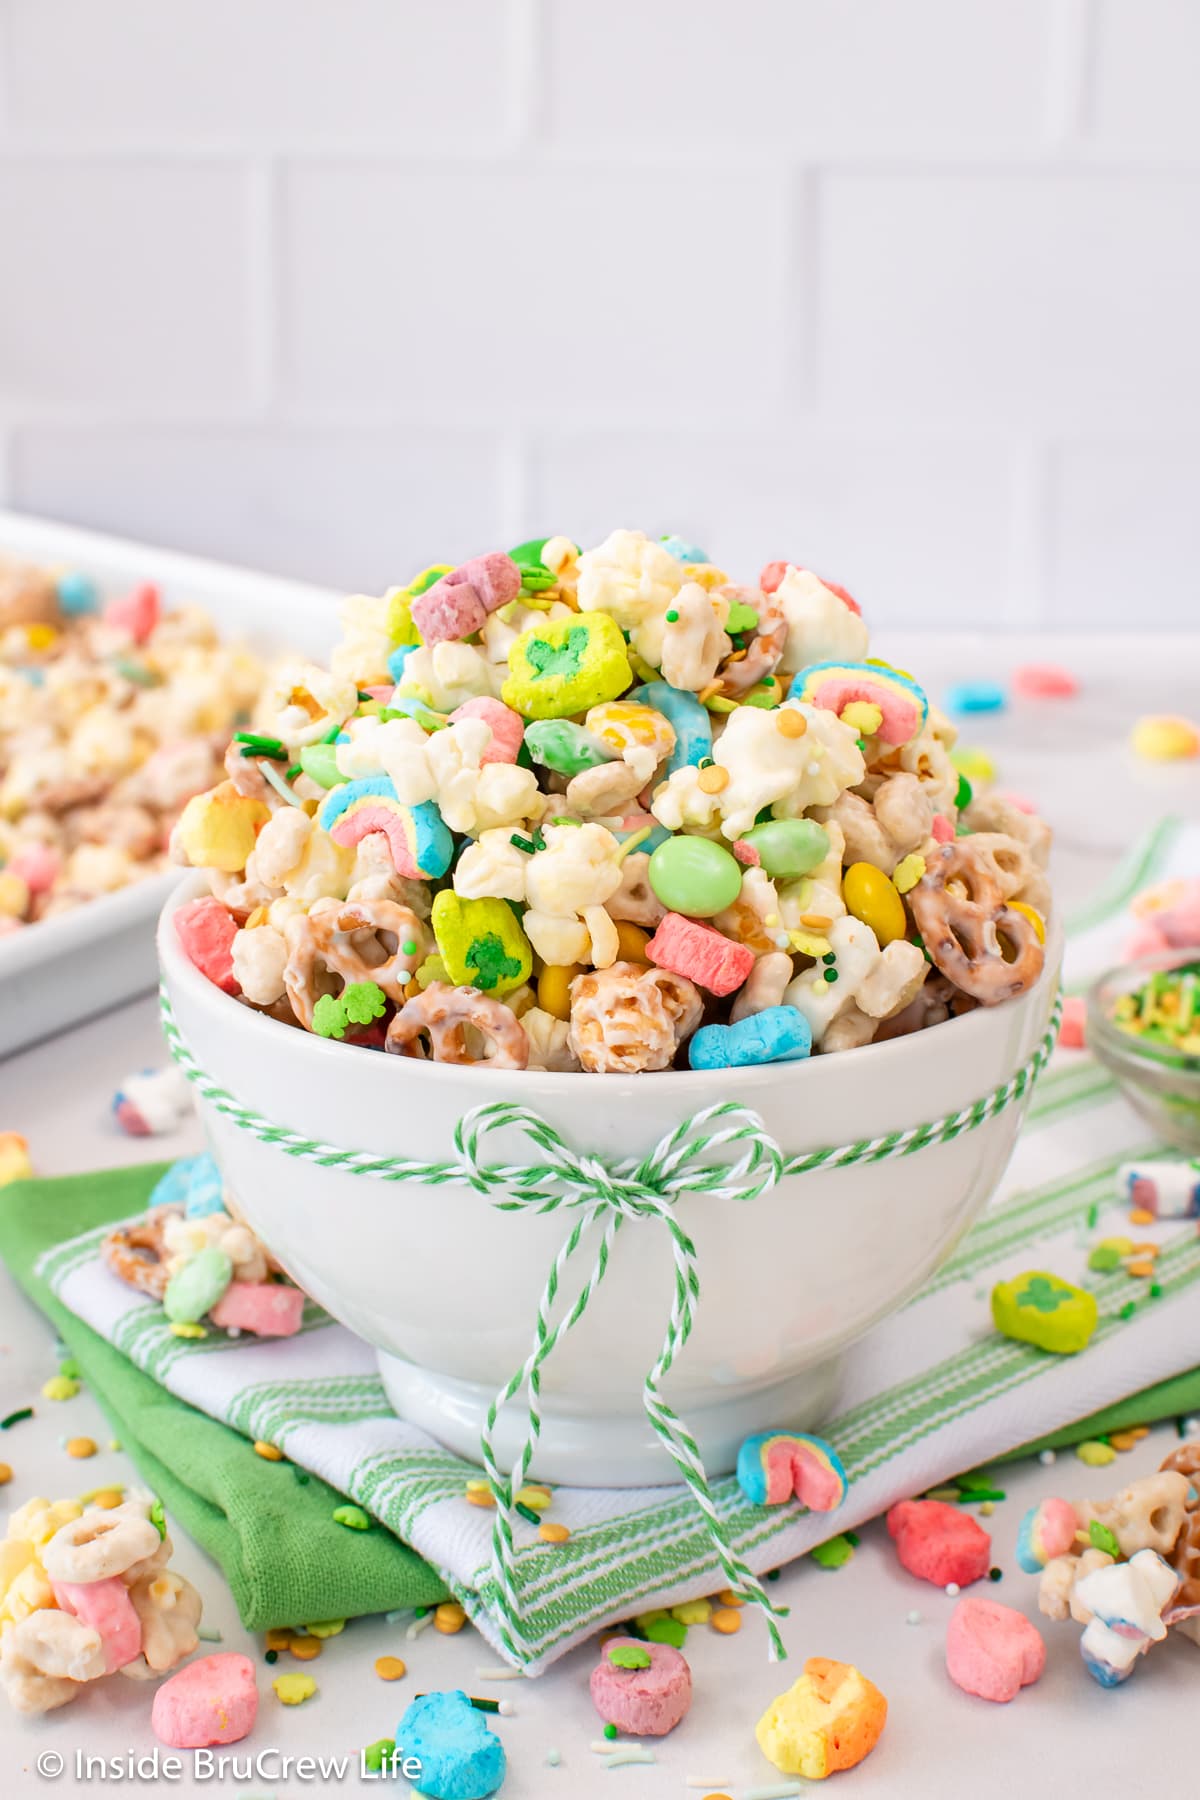 Lucky Charms snack mix piled high in a white bowl.